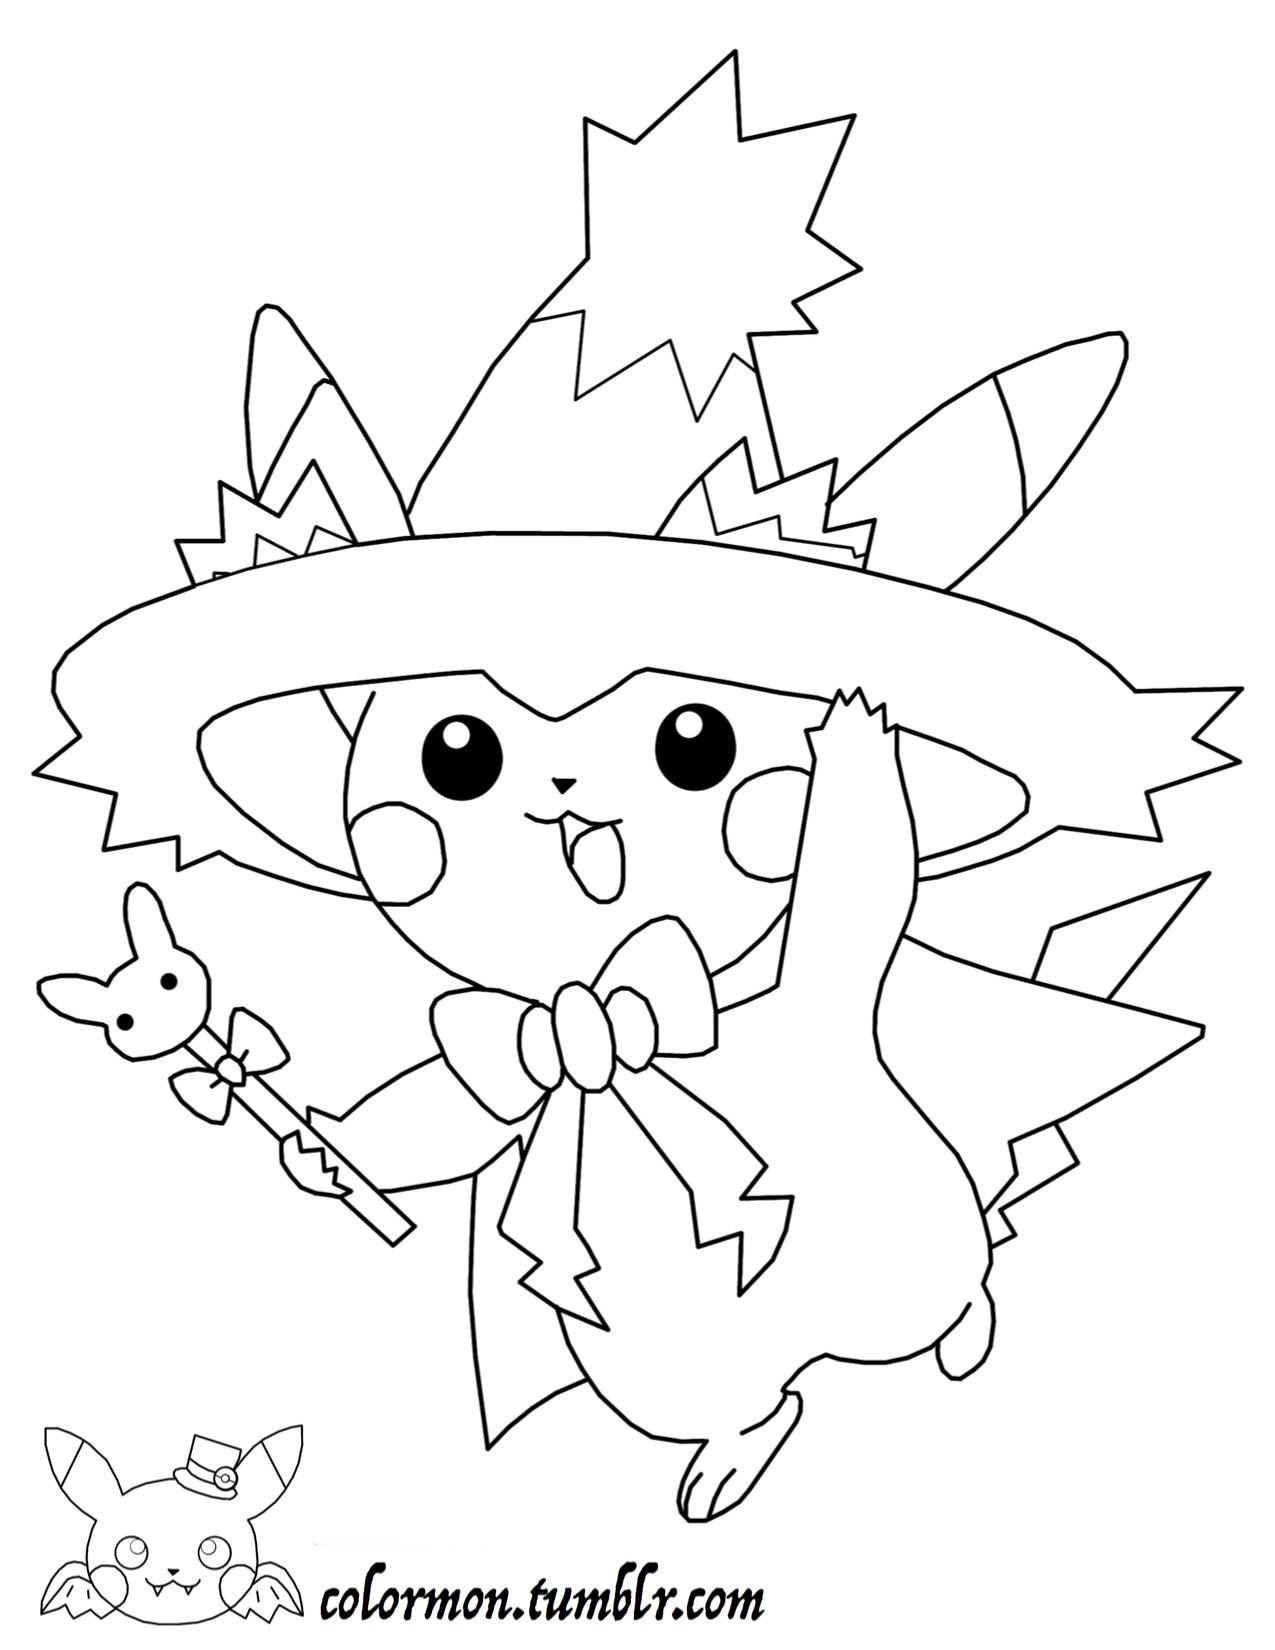 Look at how cute pikachu is all dressed up for Halloween GOTTA COLOR EM